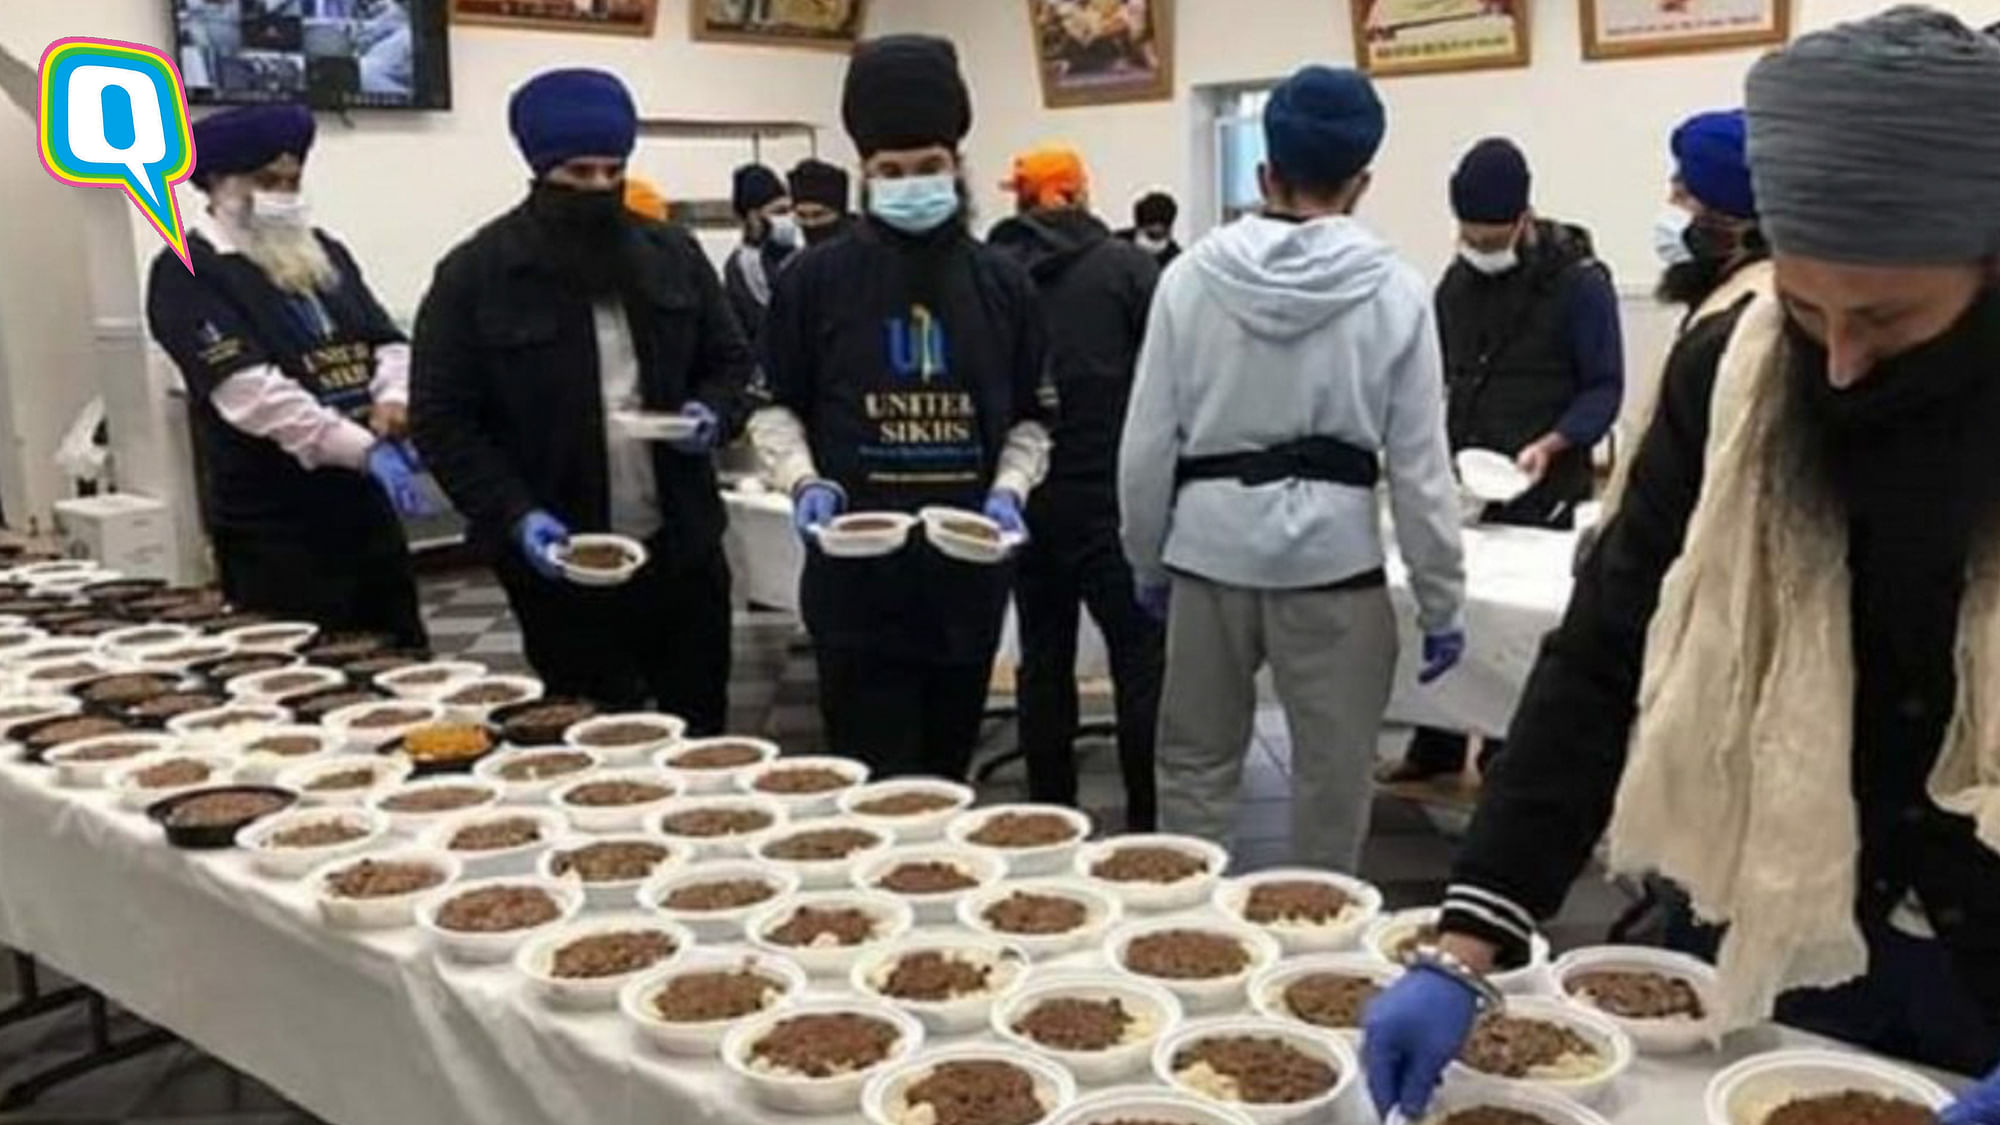 Sikh Community in NYC helps protestors for black lives matter with langar.